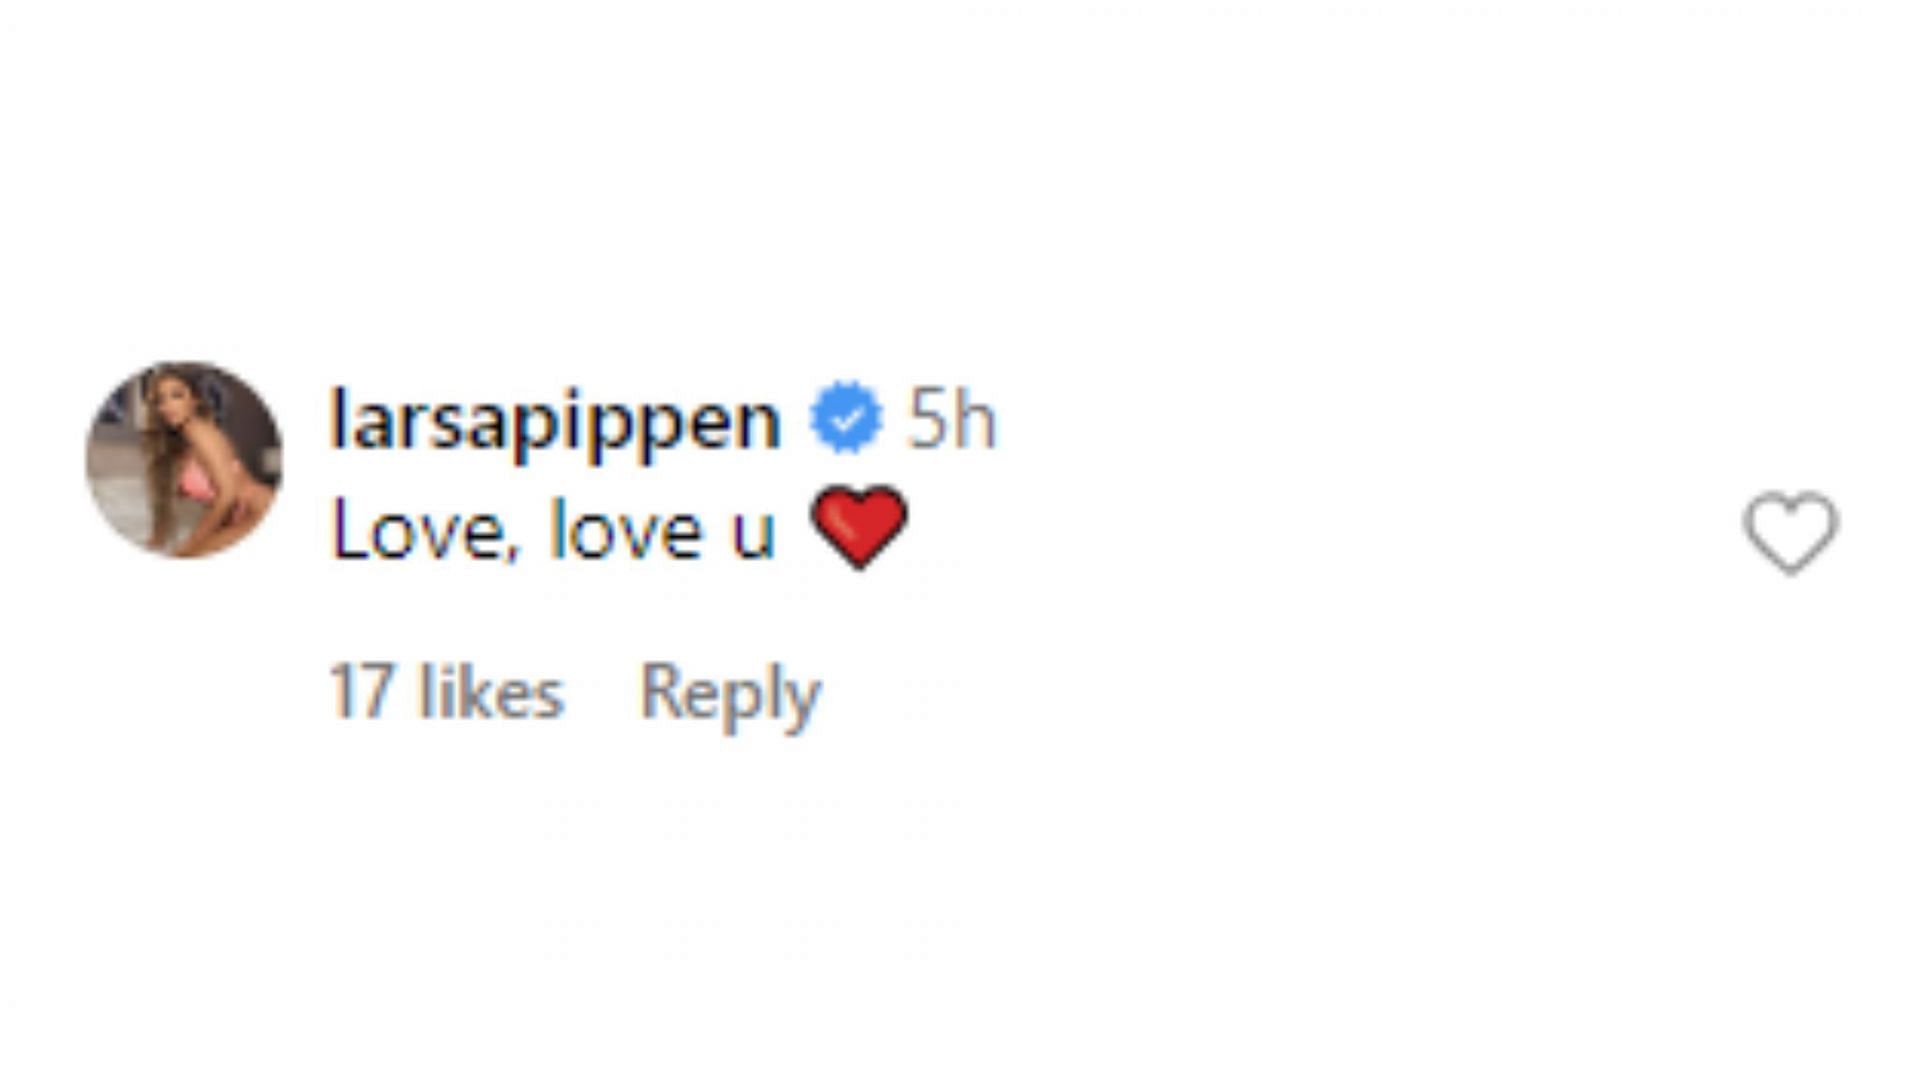 &ldquo;Love, love u&rdquo;: Larsa Pippen openly expresses her love to Marcus Jordan in the comment section of his Instagram post